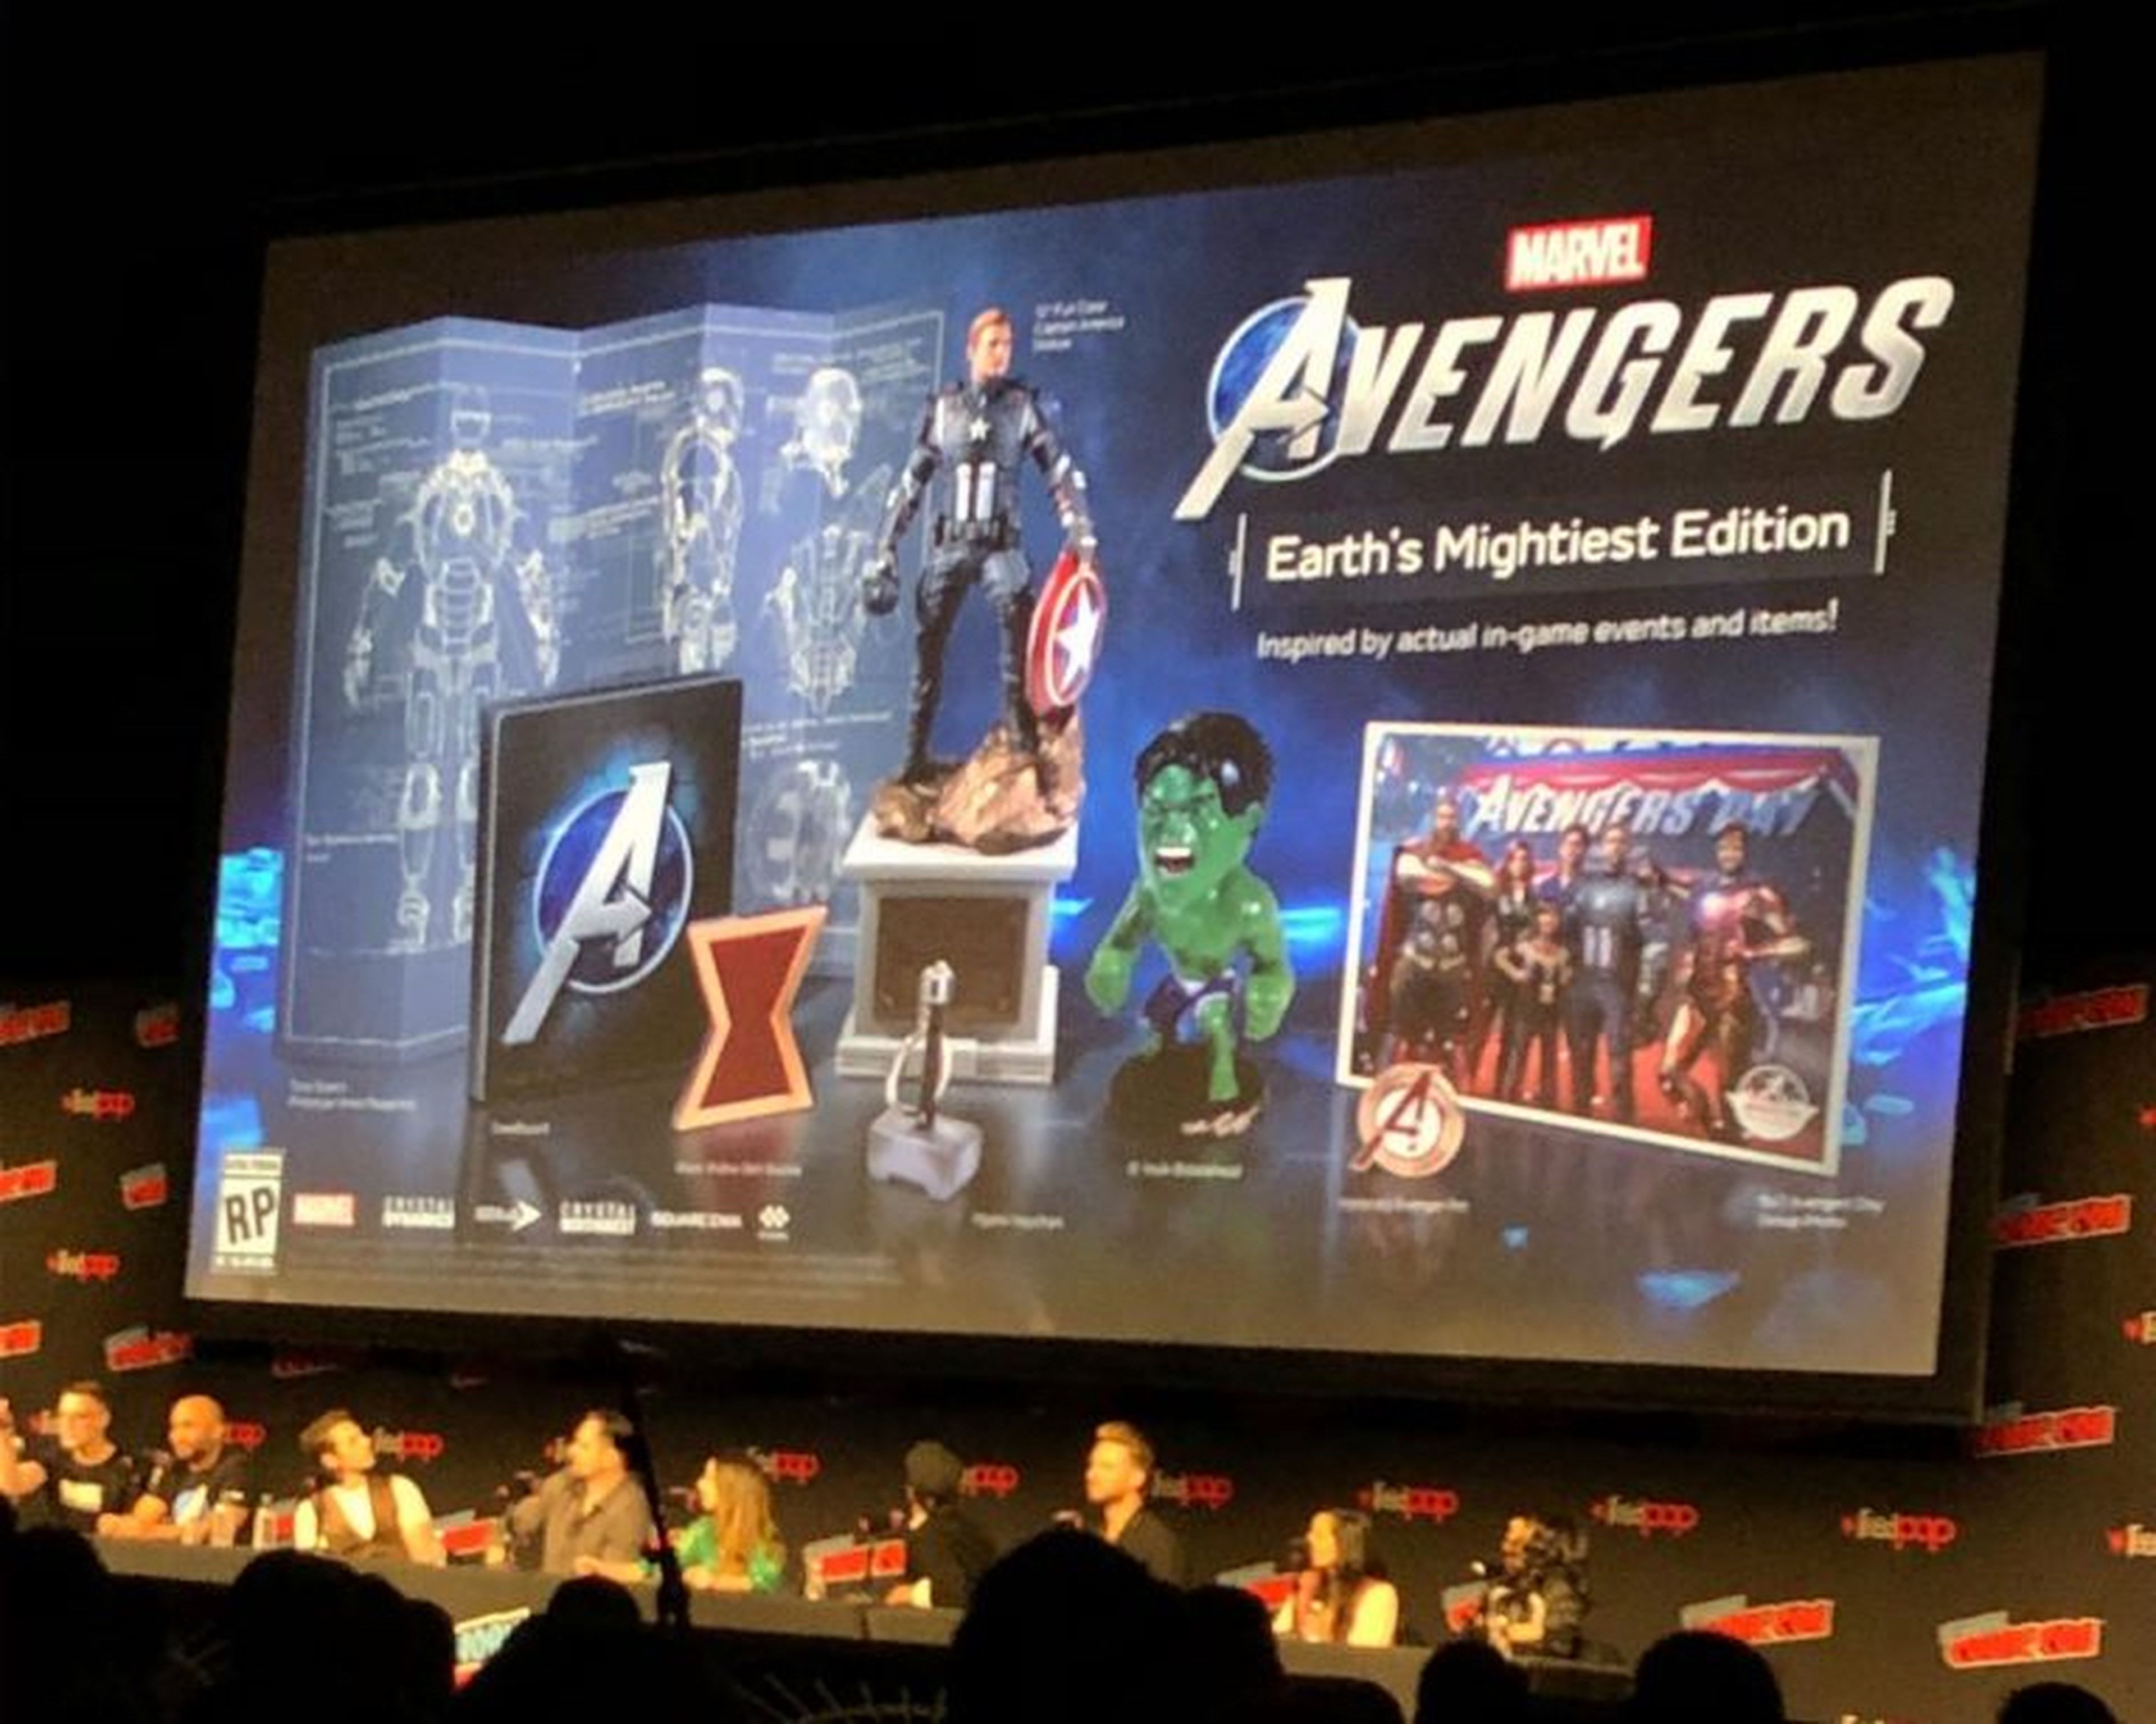 Marvel's Avengers Earth's Mightiest Edition